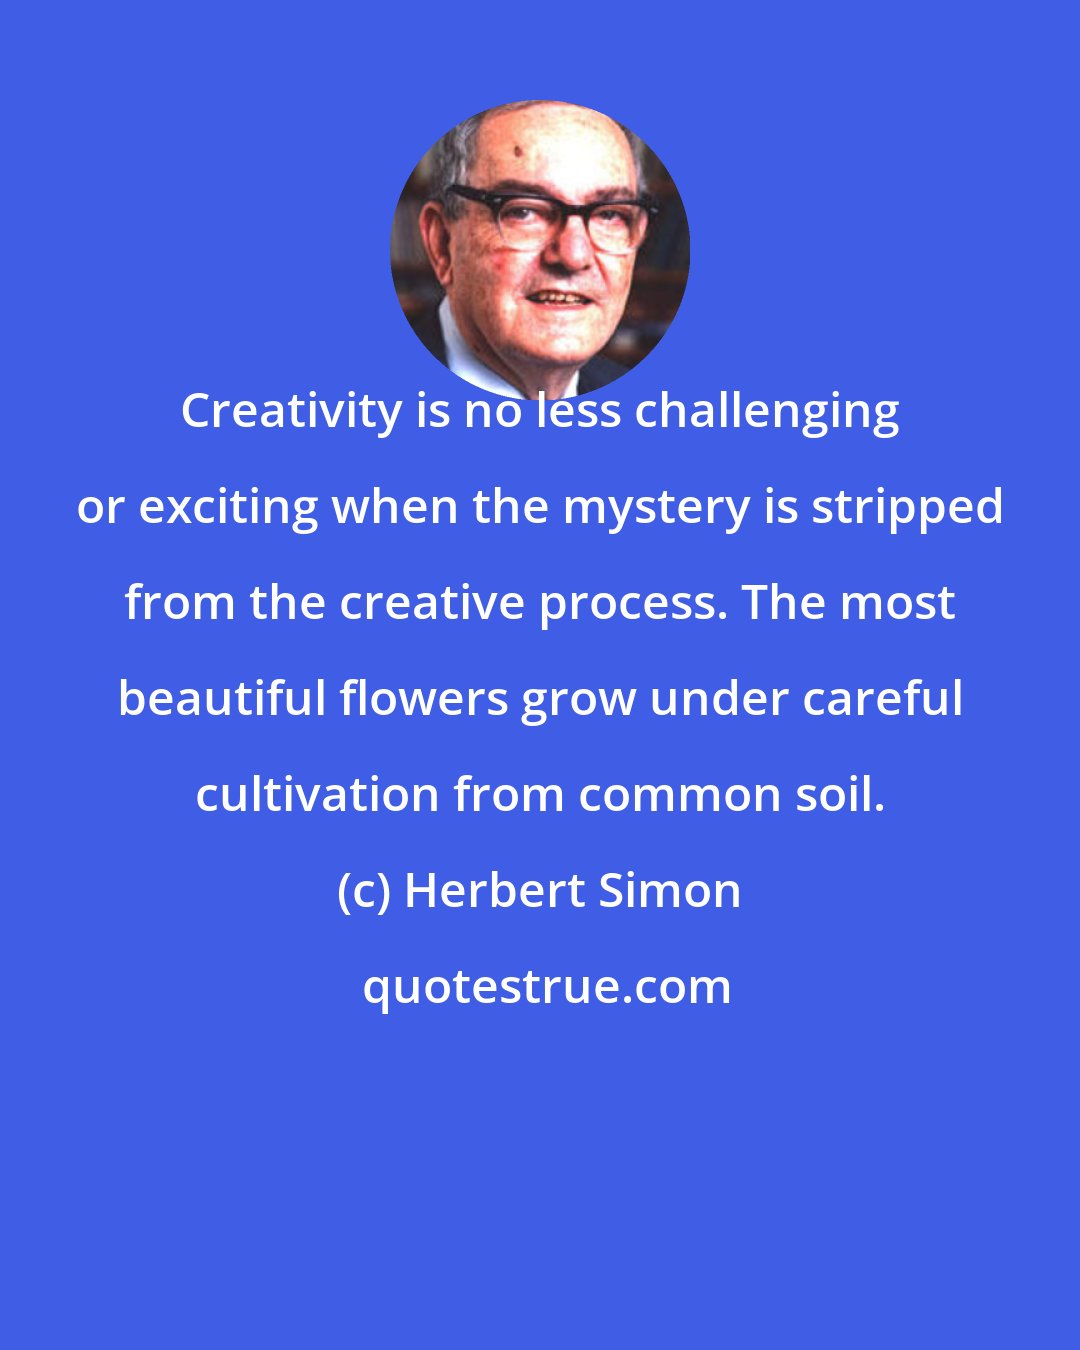 Herbert Simon: Creativity is no less challenging or exciting when the mystery is stripped from the creative process. The most beautiful flowers grow under careful cultivation from common soil.